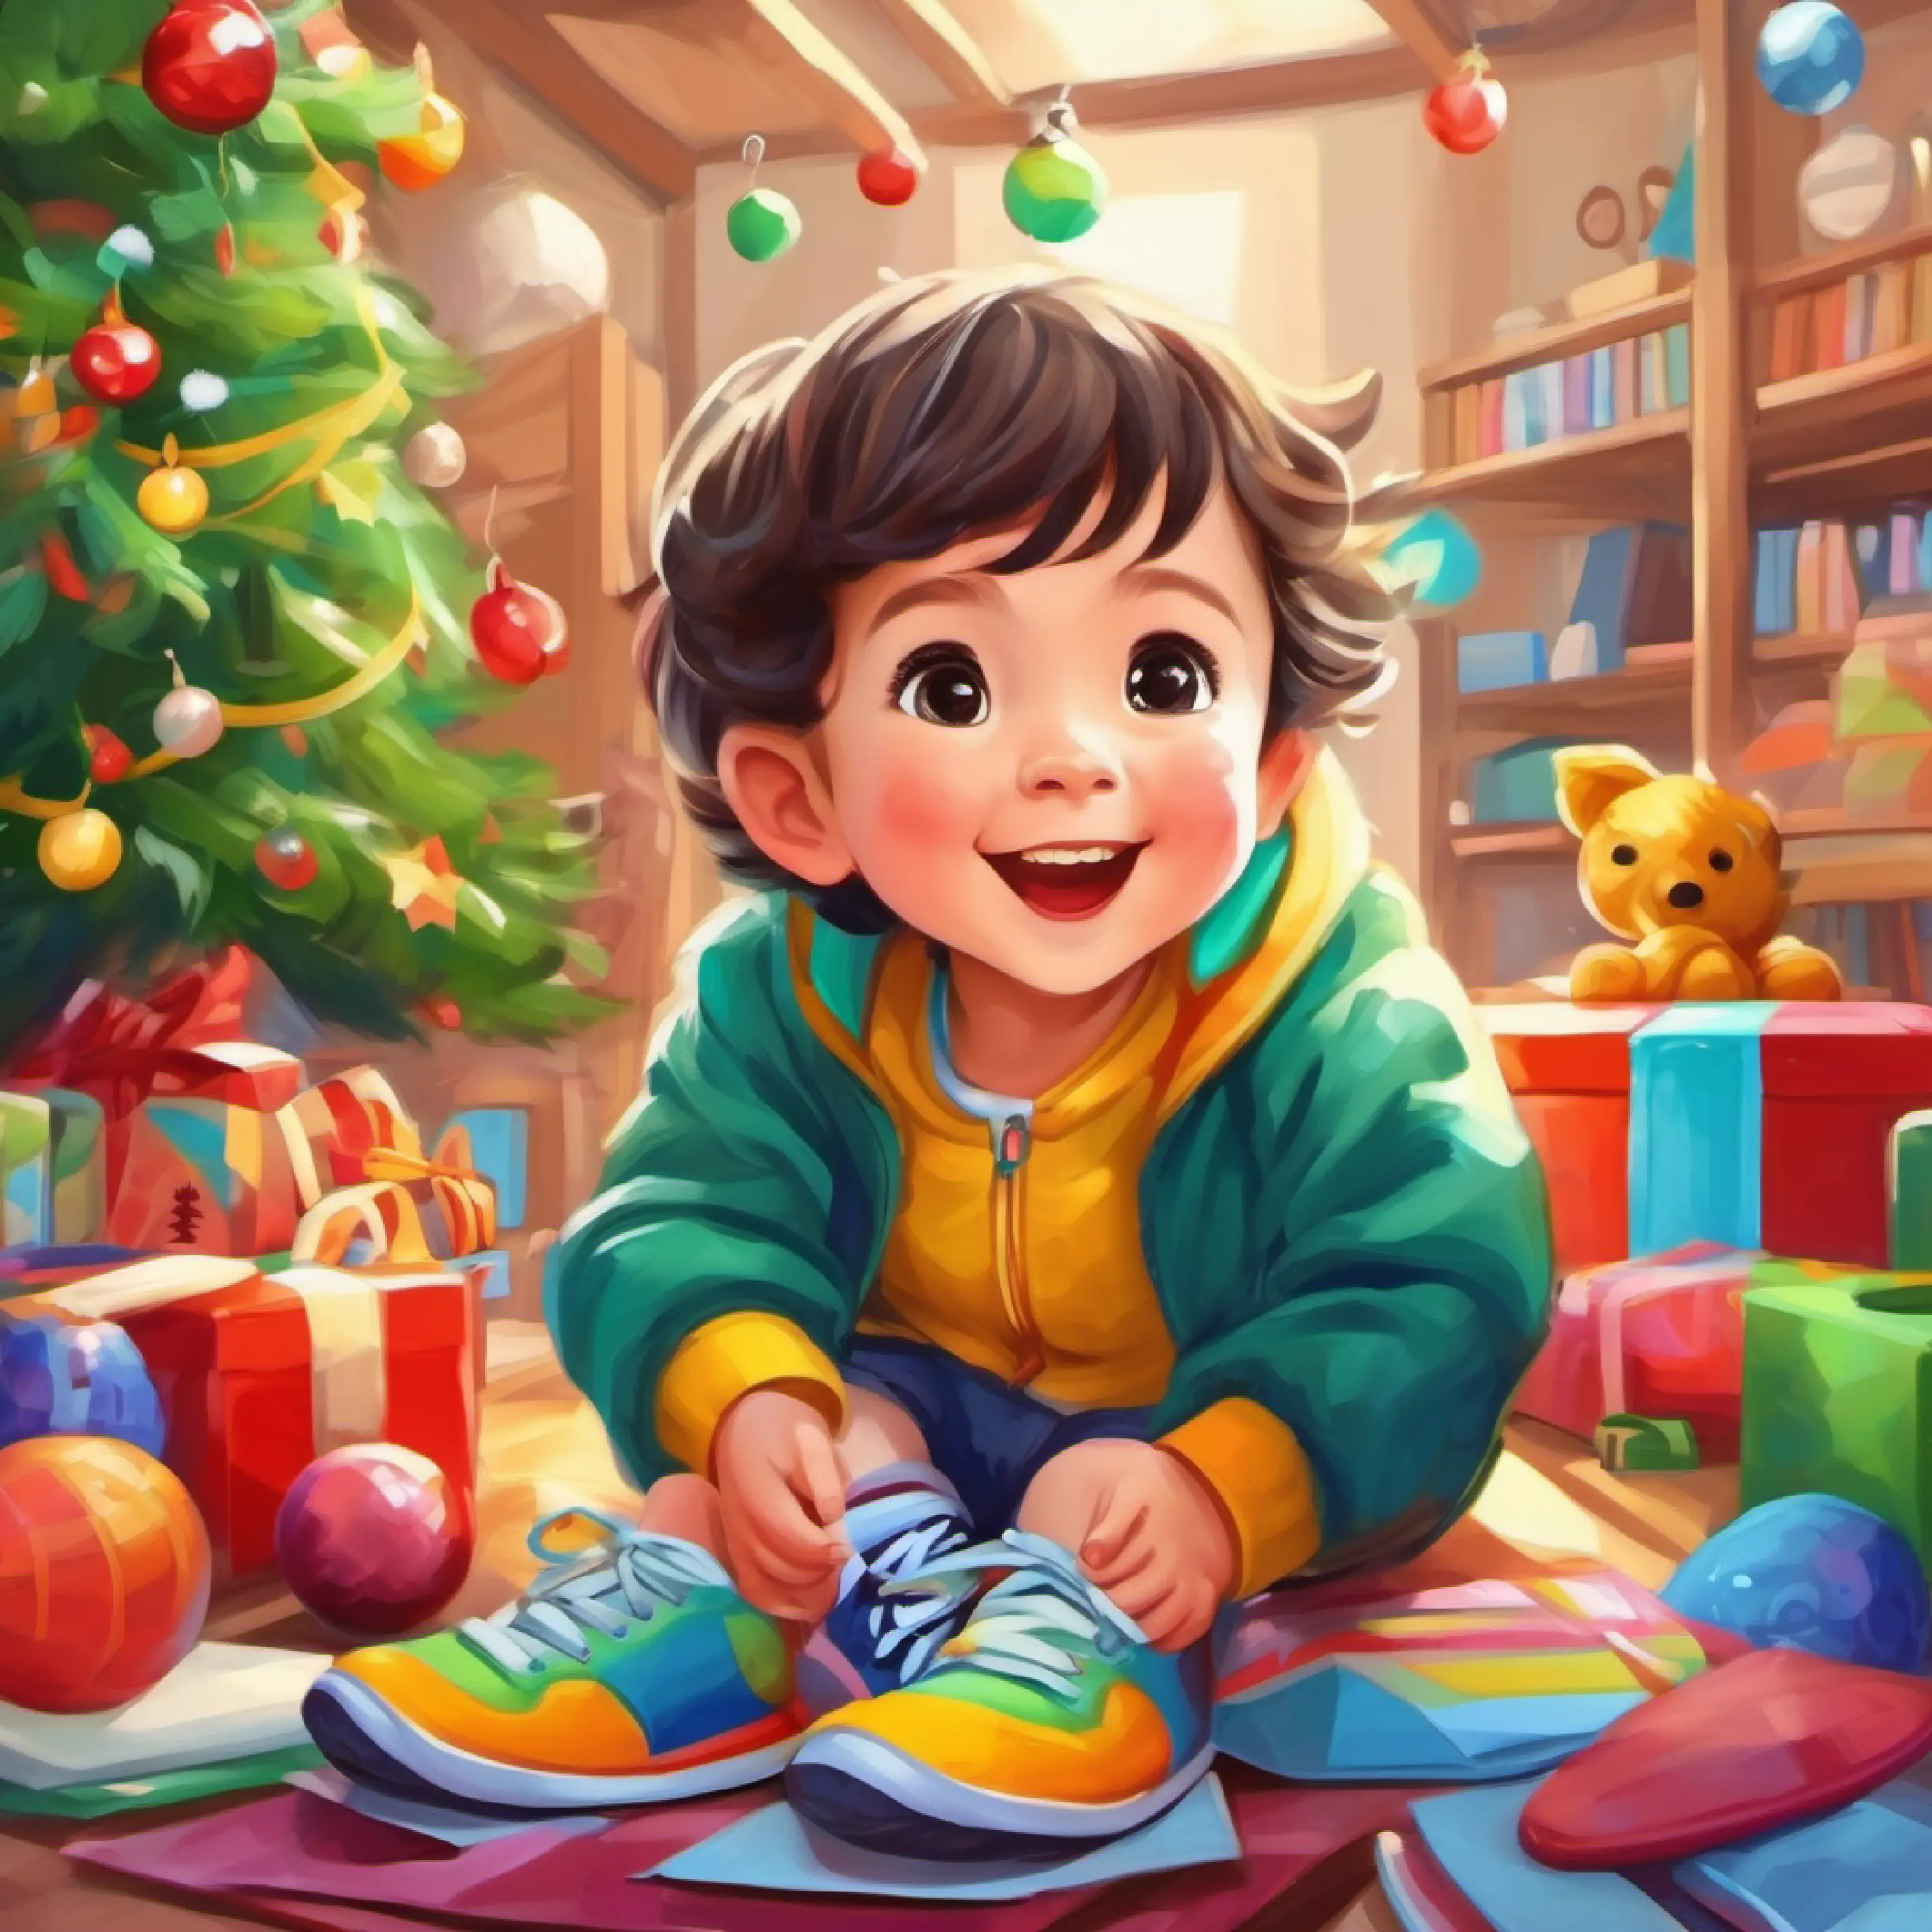 Child with joyful eyes, wears colorful clothes and sneakers enjoys a variety of toys at school.